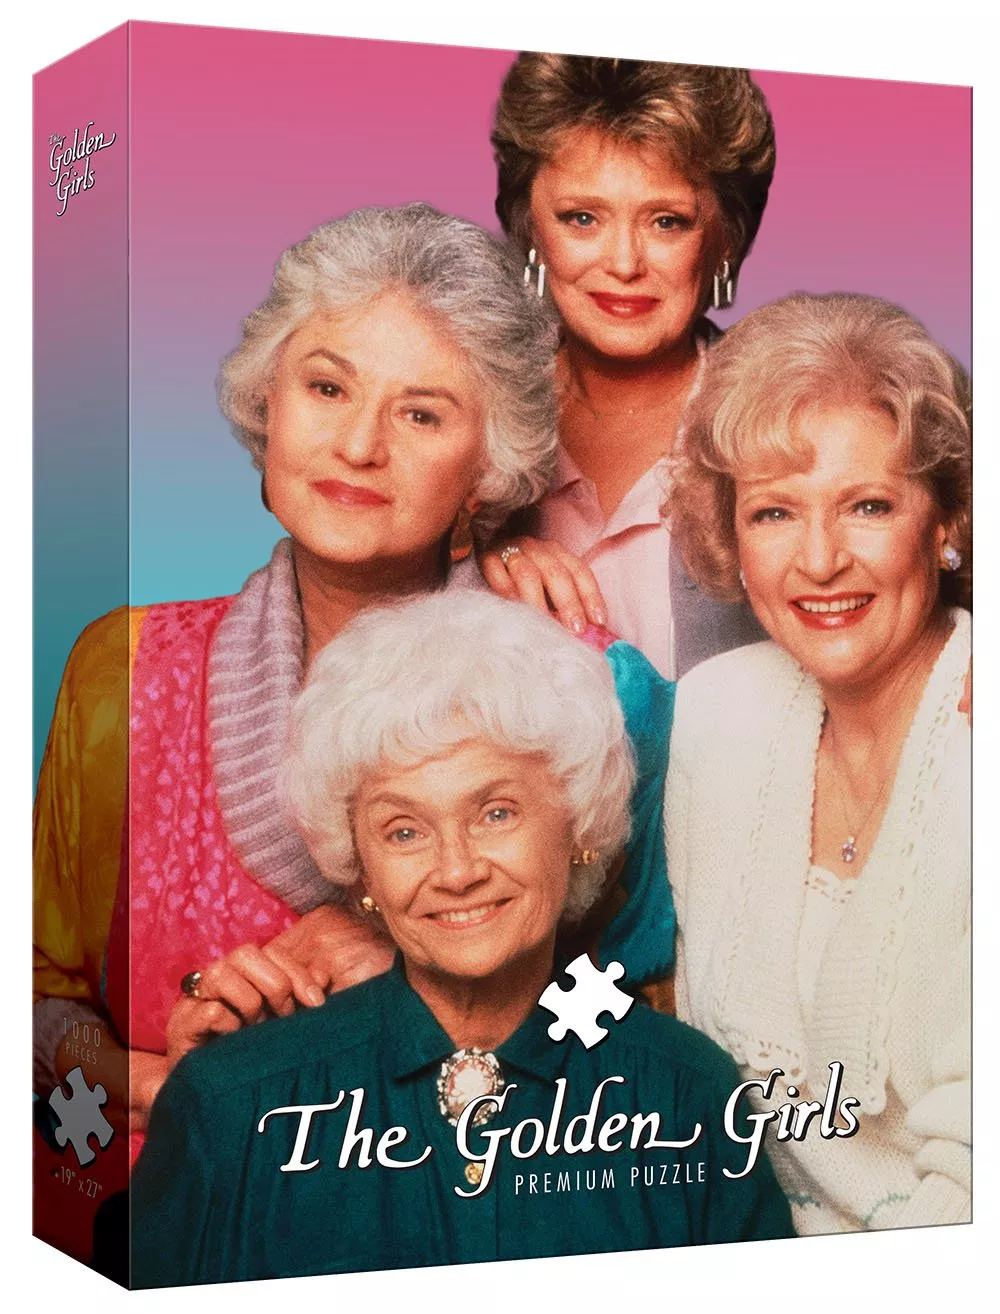 Best Gifts For Cousins 2023: Female Cousin Golden Girls Puzzle 2023